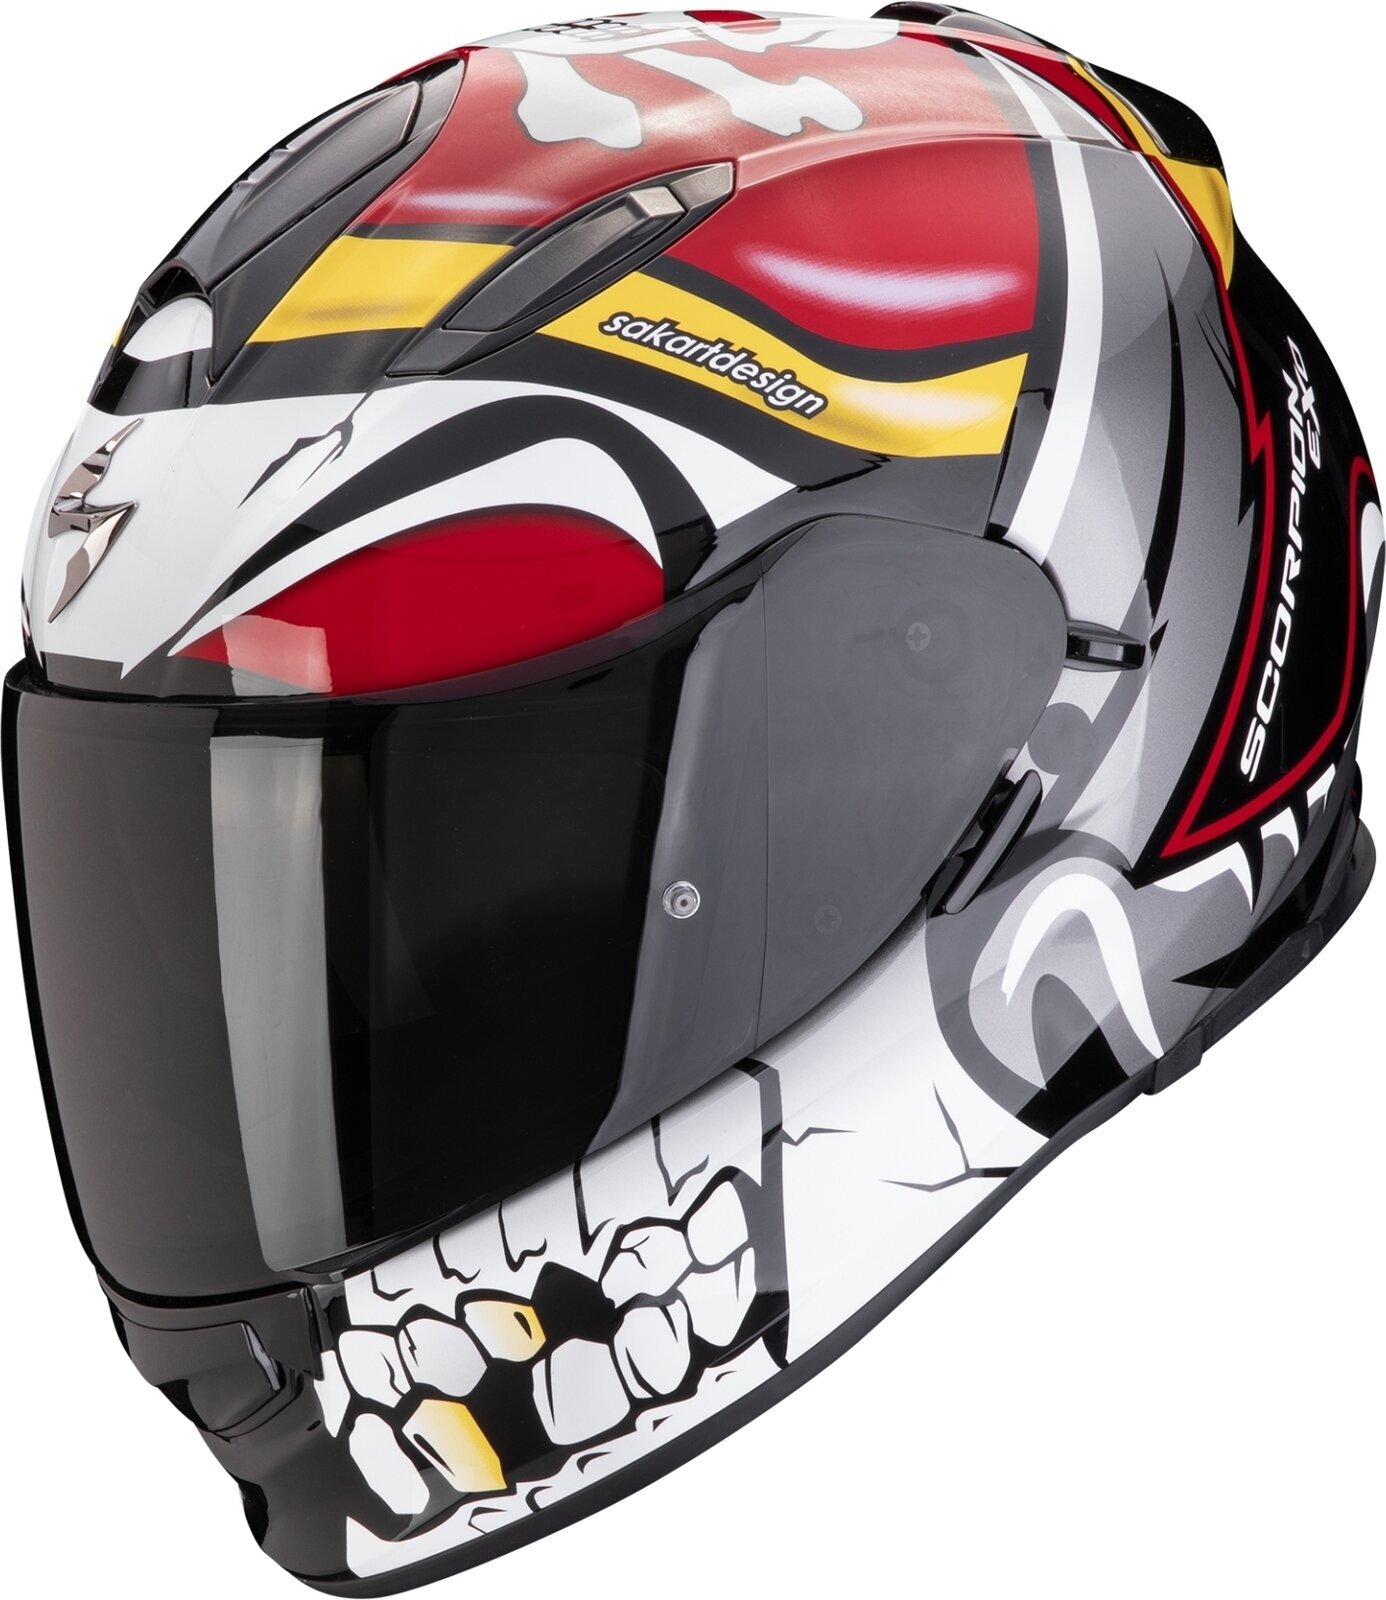 Helm Scorpion EXO 491 PIRATE Red S Helm